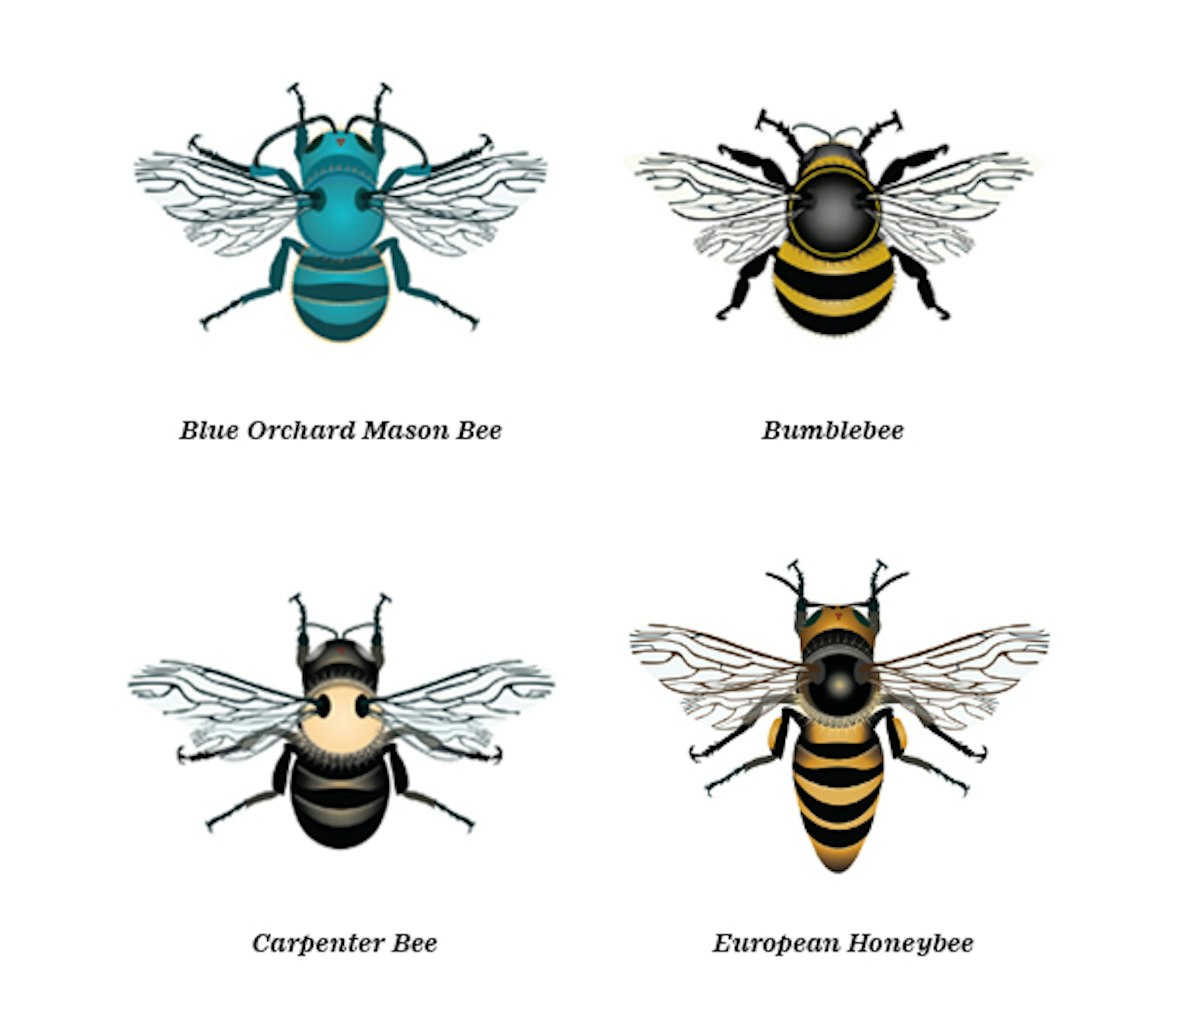 Illustrations of four types of bees; blue orchard mason bee, bumblebee, carpenter bee, and european honeybee, with labels.